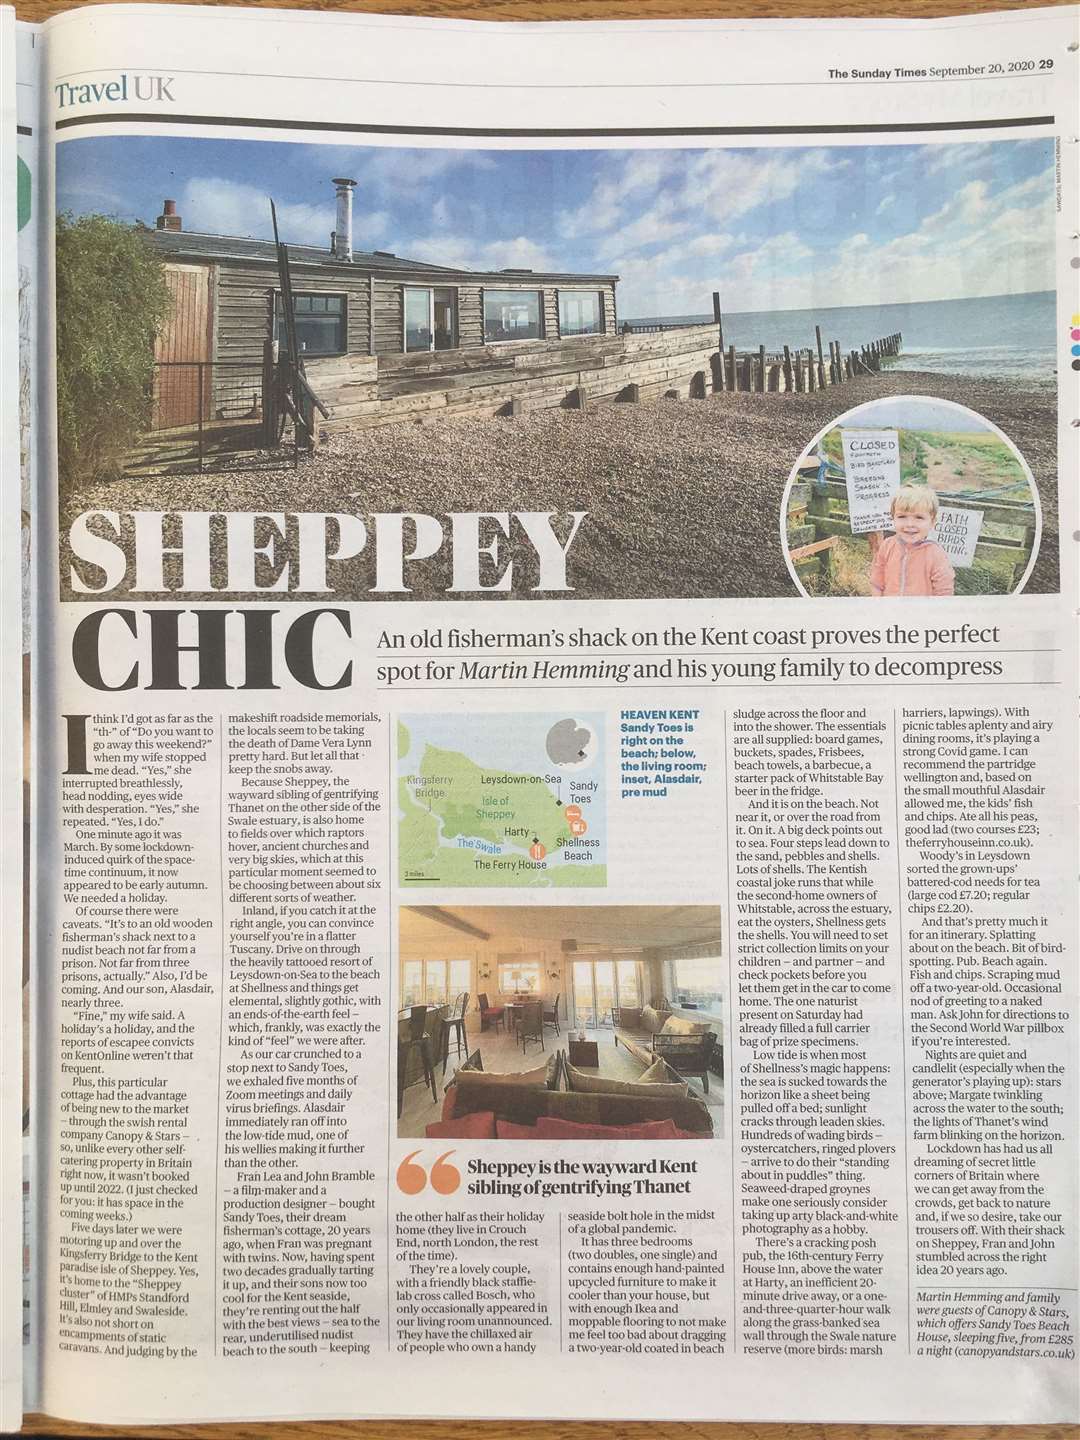 Sheppey Chic - feature on the Isle of Sheppey in the Sunday Times